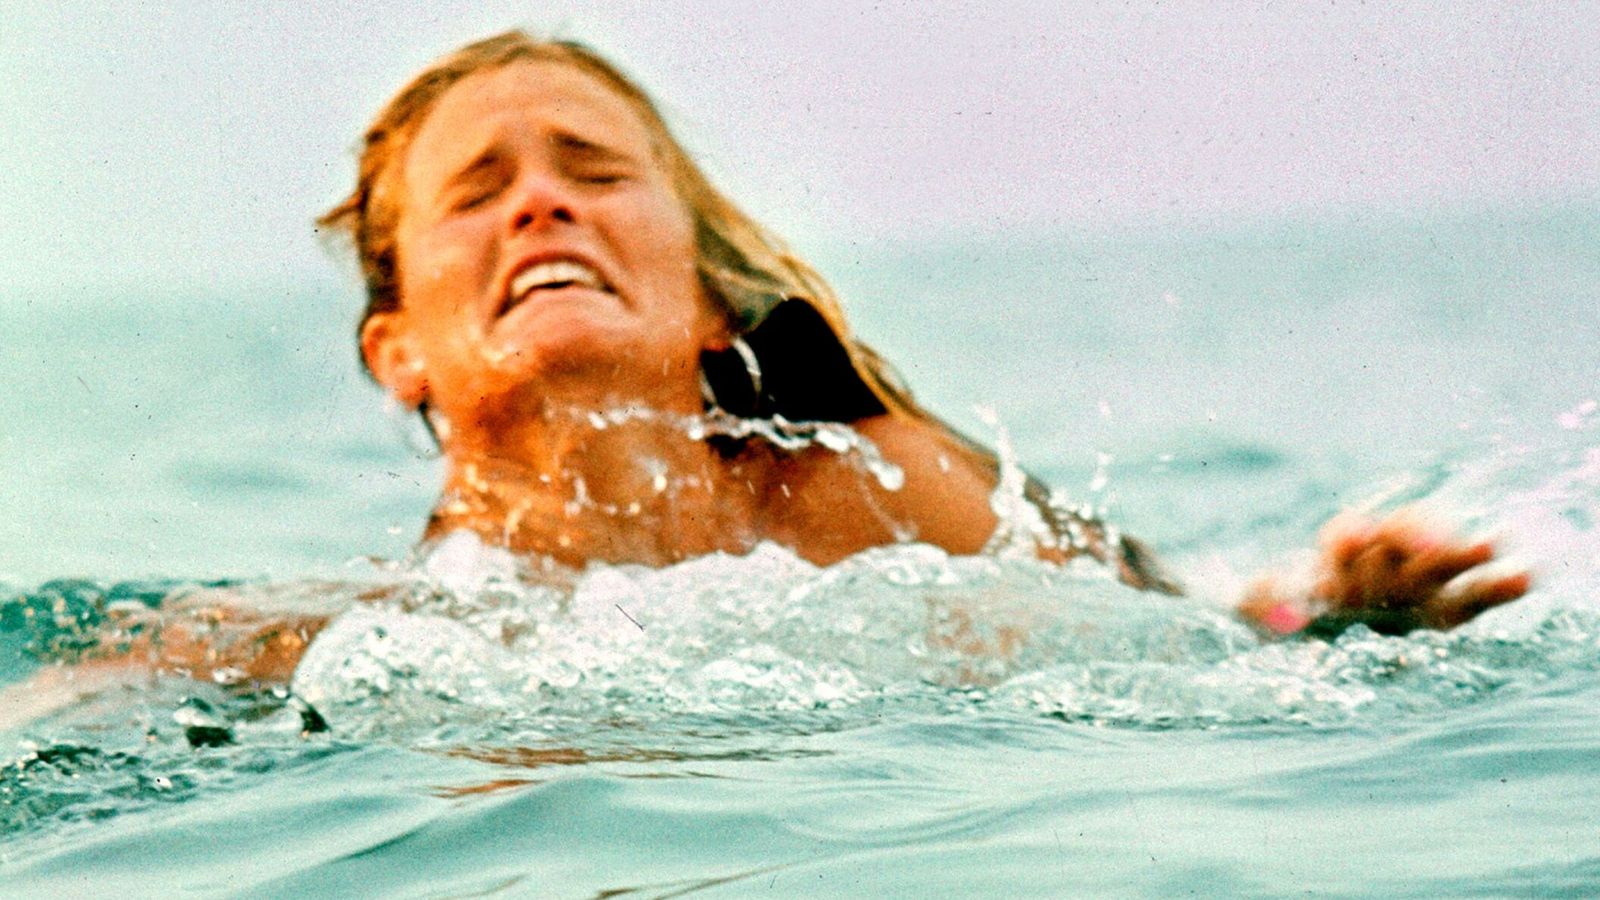 First sufferer in Jaws has died aged 77